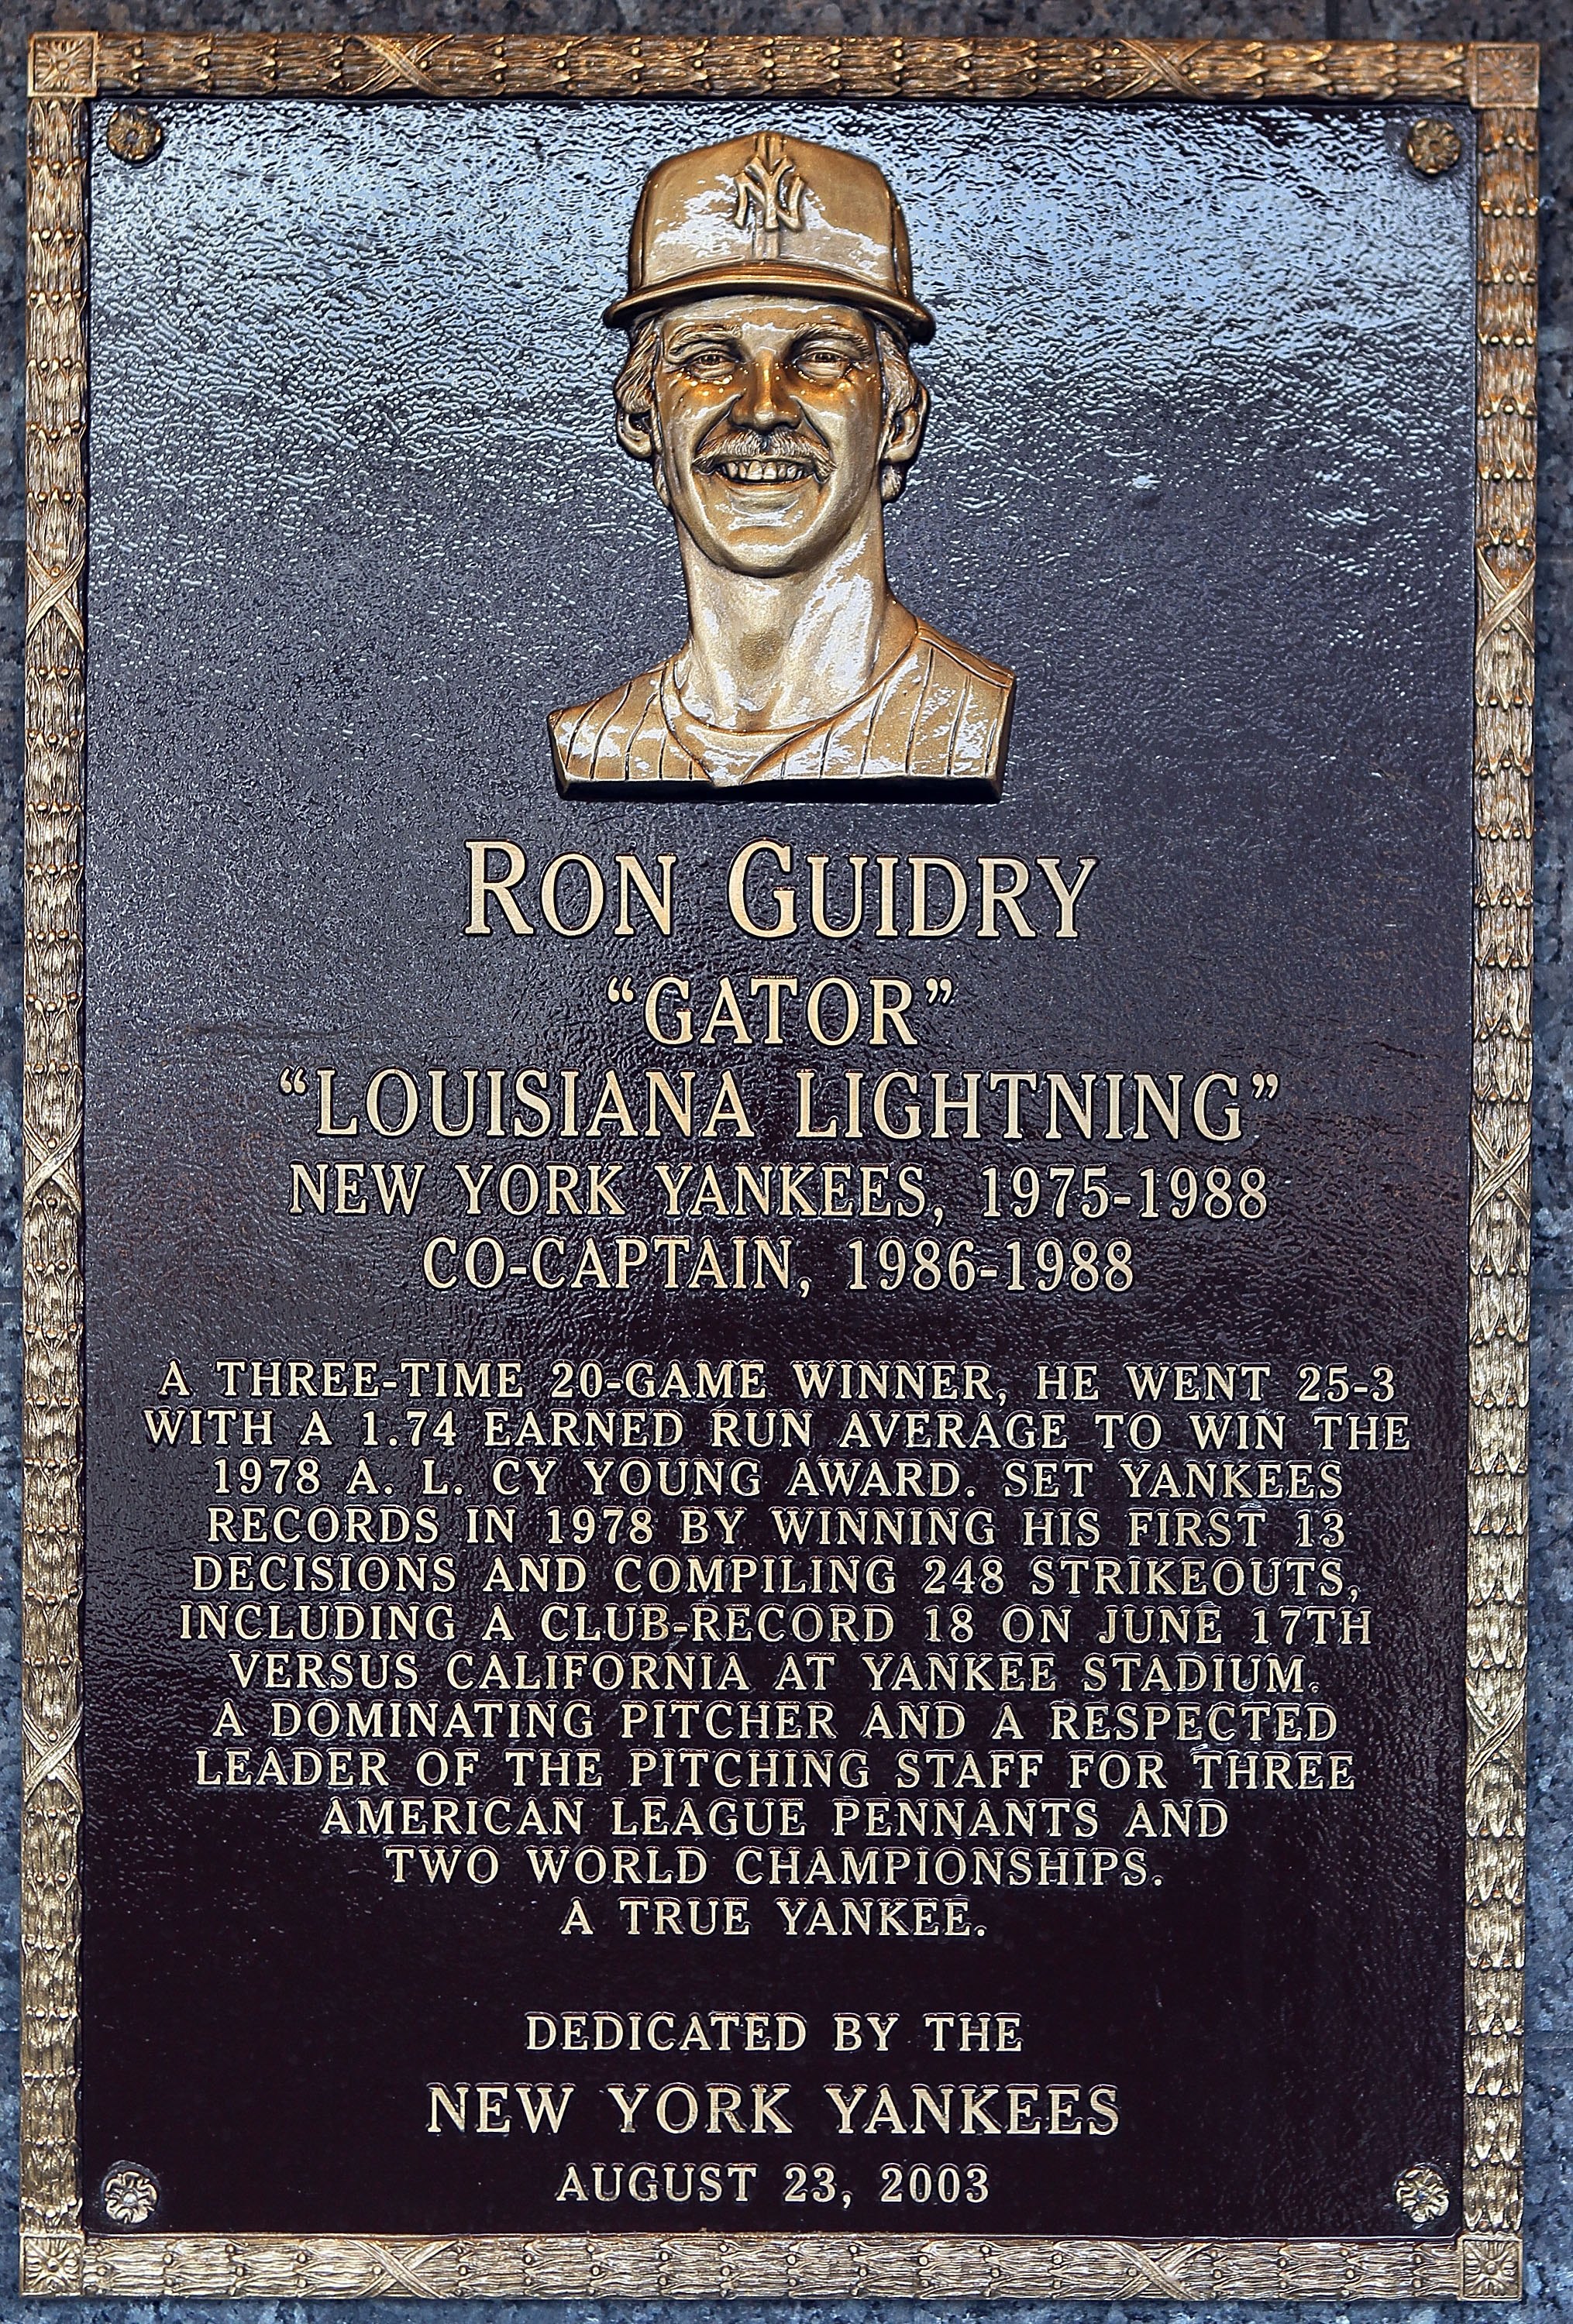 NEW YORK - MAY 02:  The plaque of Ron Guidry is seen in Monument Park at Yankee Stadium prior to the game between the New York Yankees and the Chicago White Sox on May 2, 2010 in the Bronx borough of New York City. The Yankees defeated the White Sox 12-3.